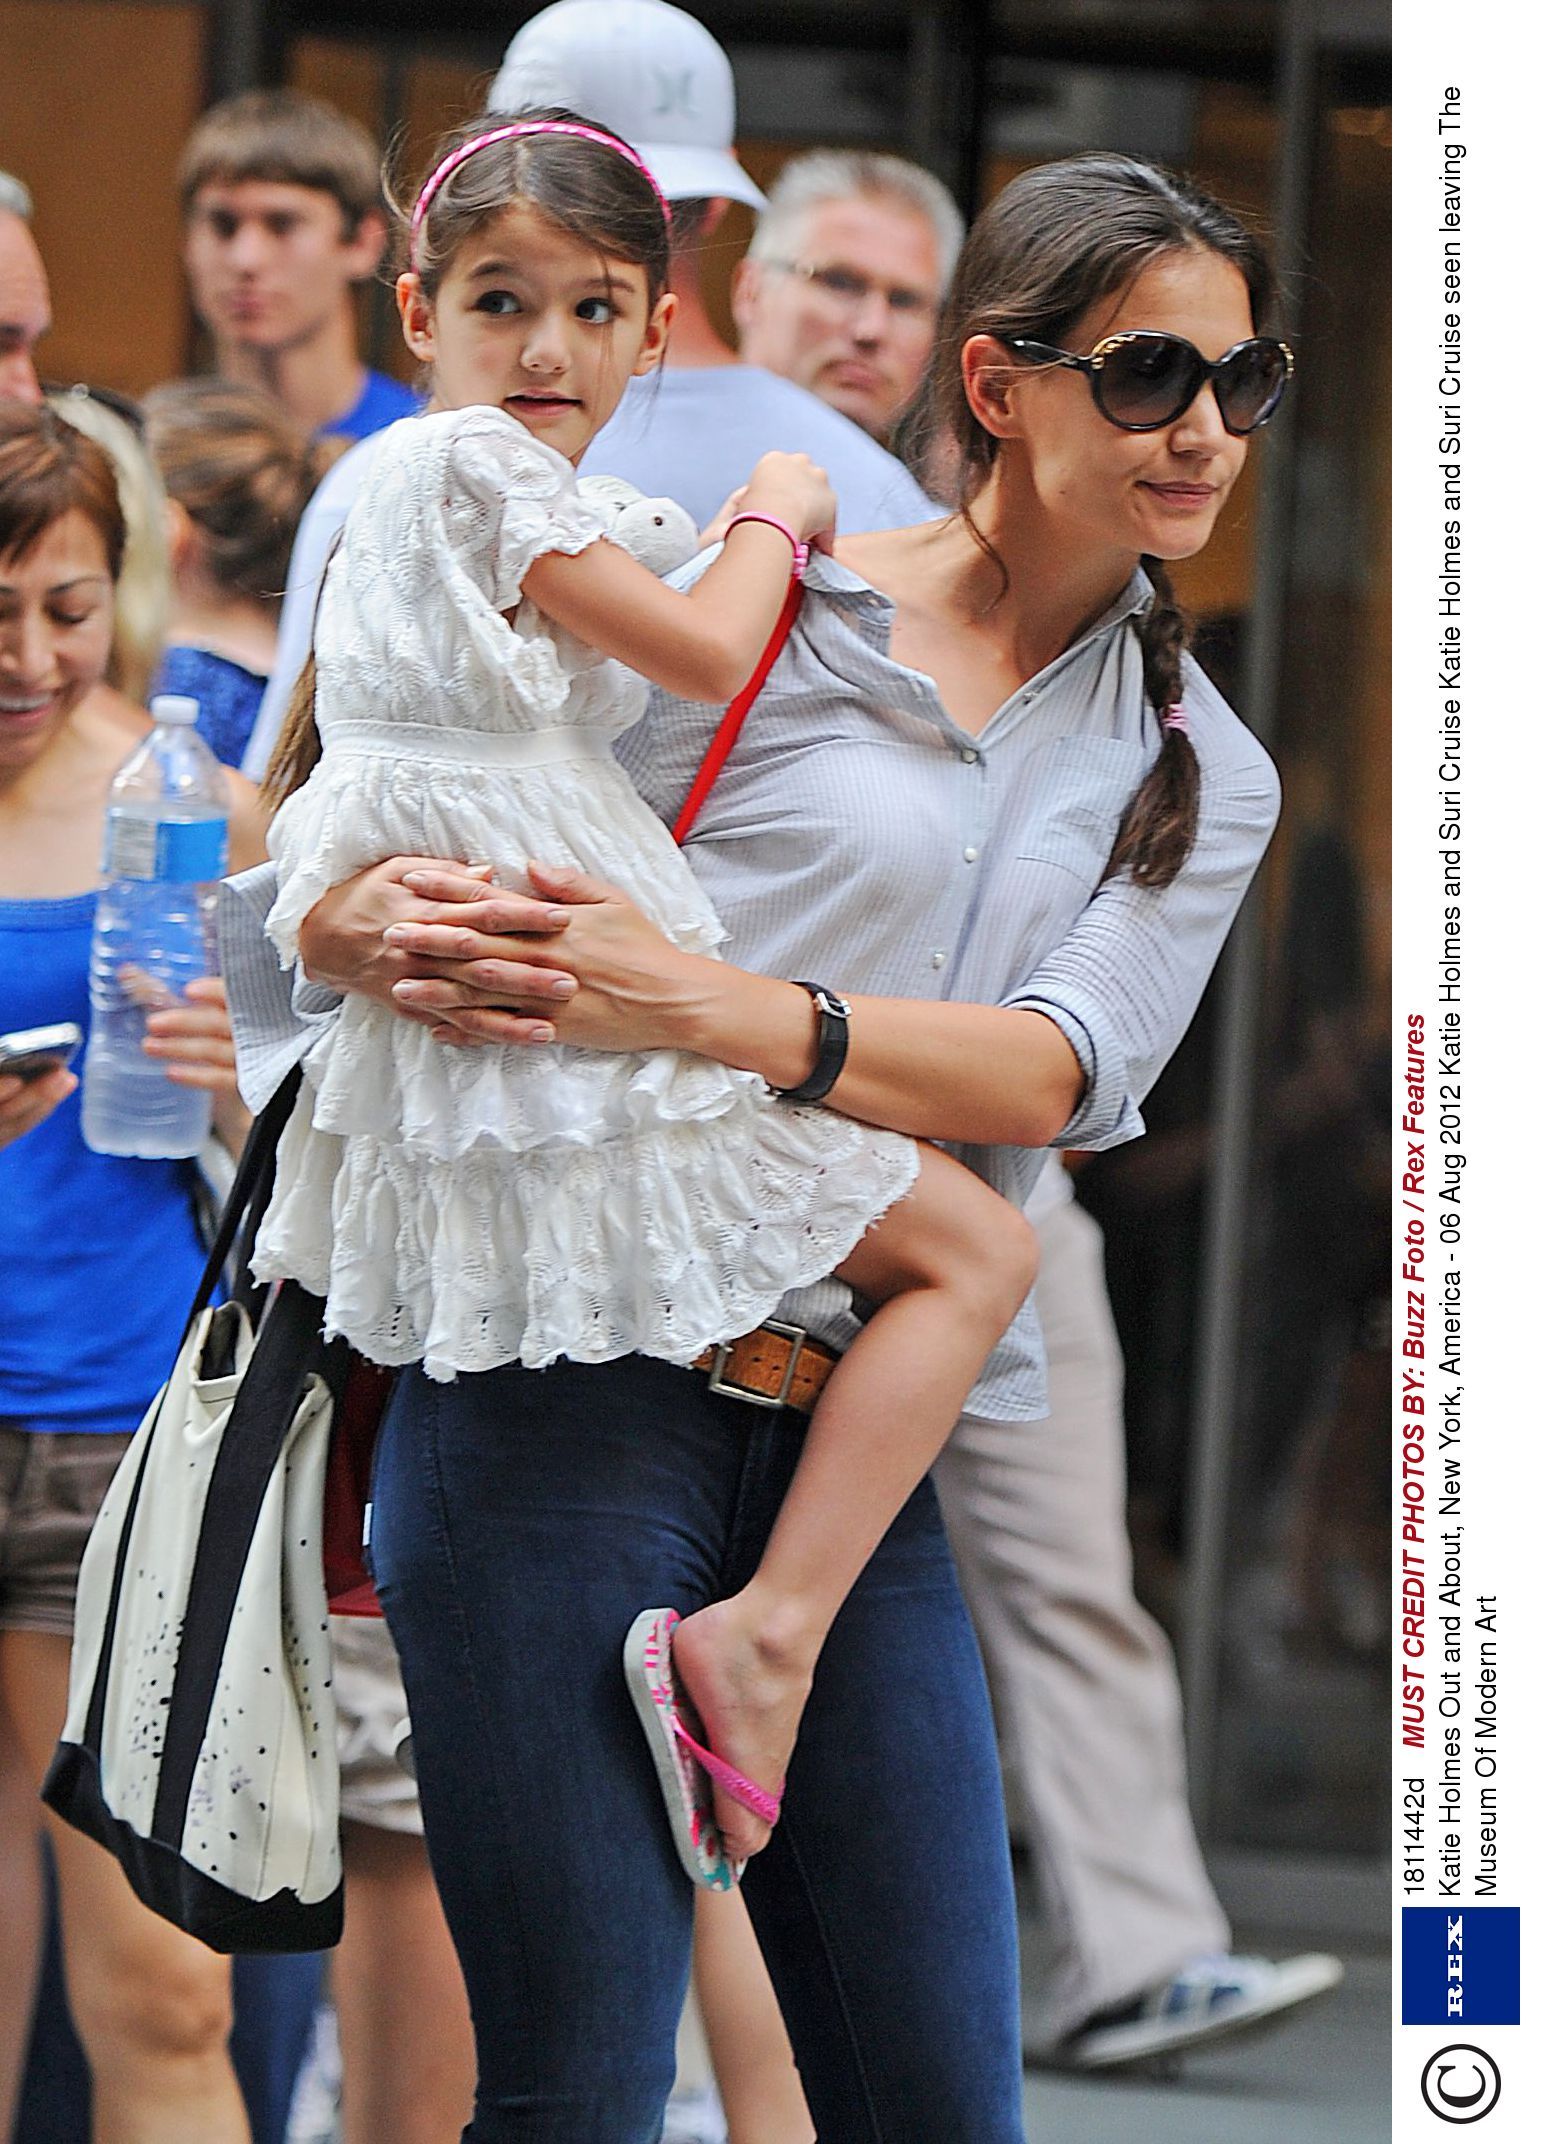 Cruise didnt ban Katie Holmes family image